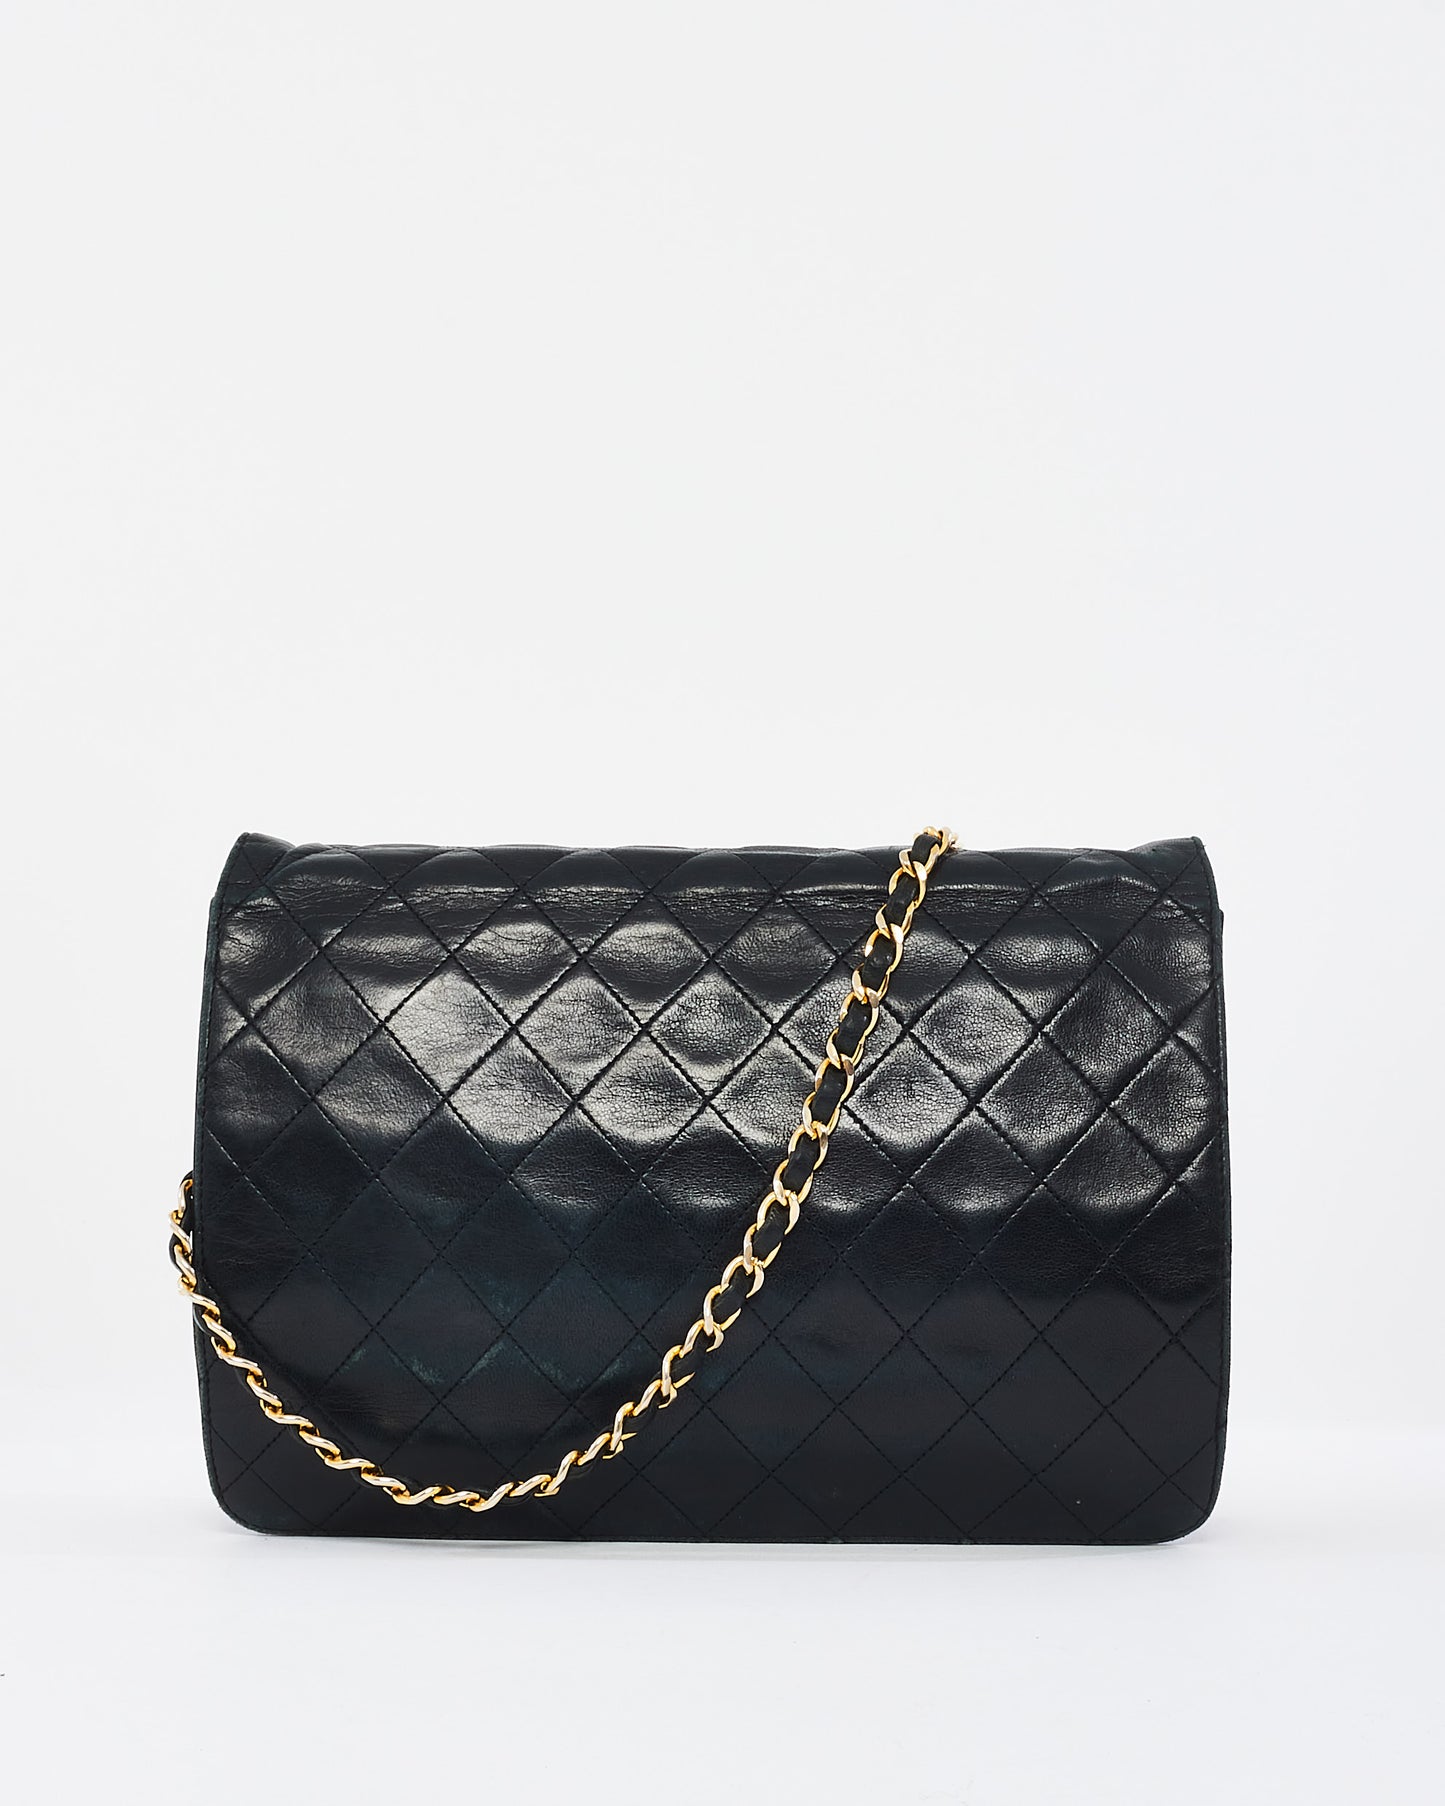 Chanel Vintage Black Quilted Lambskin Leather Single Flap Bag